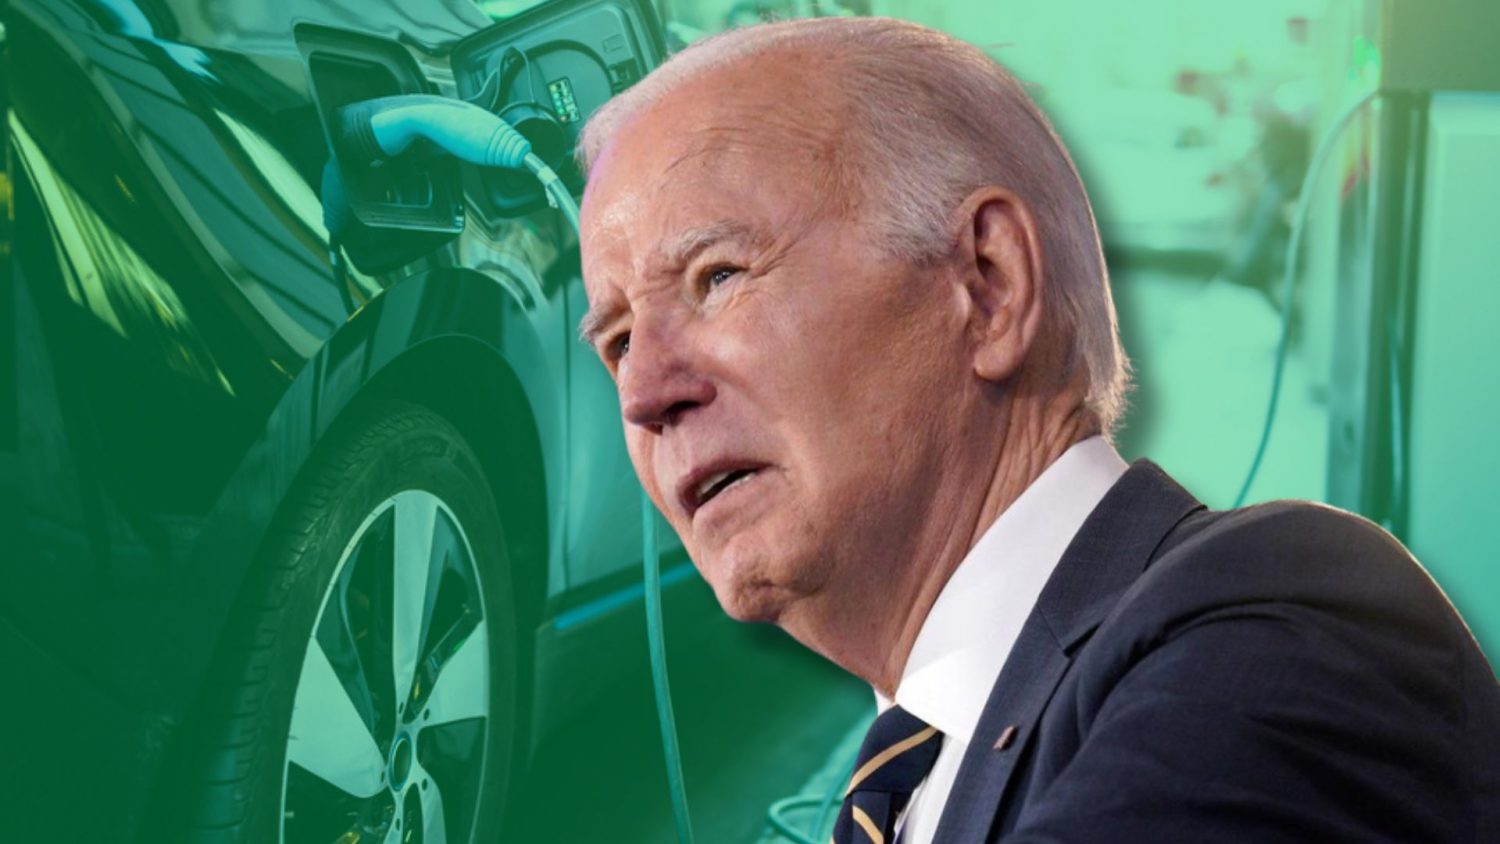 Ohio has become the first state to use funds awarded by the Biden Administration to build an electric vehicle charging station.